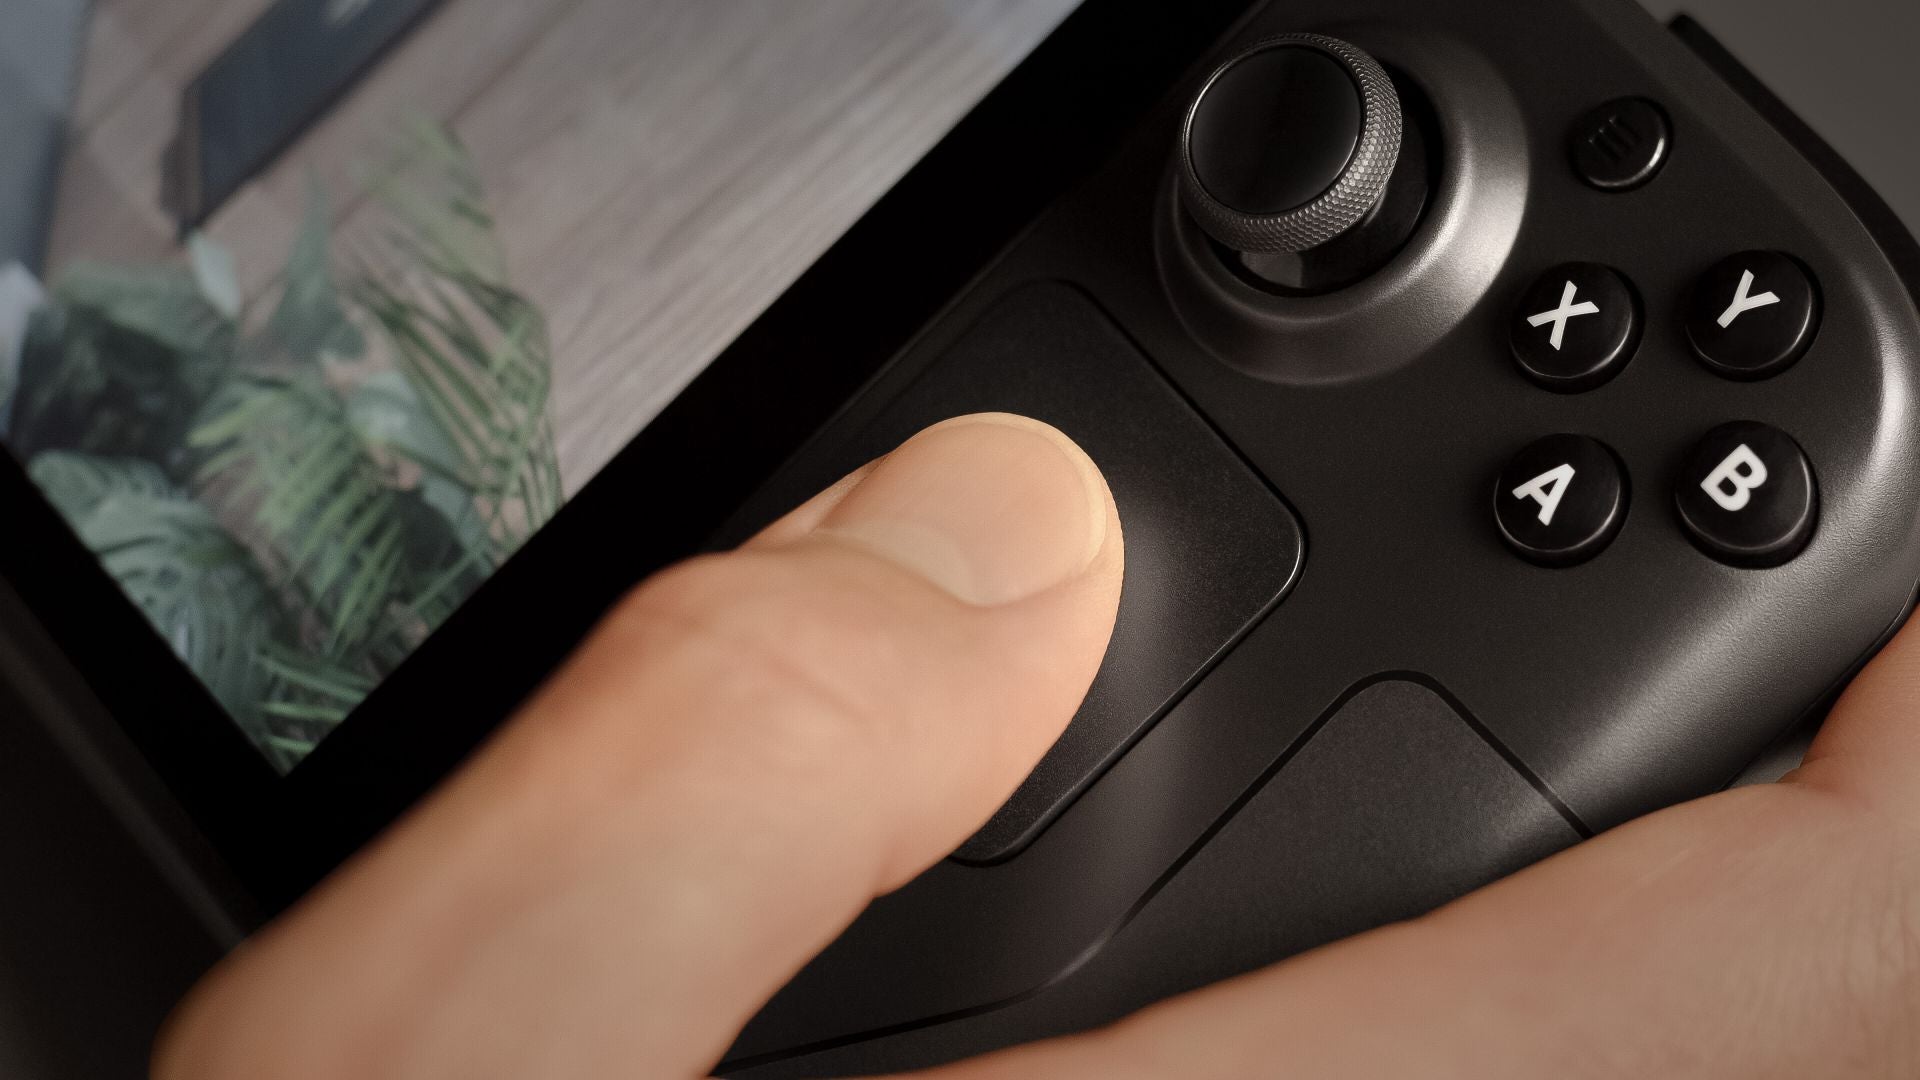 Image for Take a closer look at Steam Deck's trackpad and gyro controls